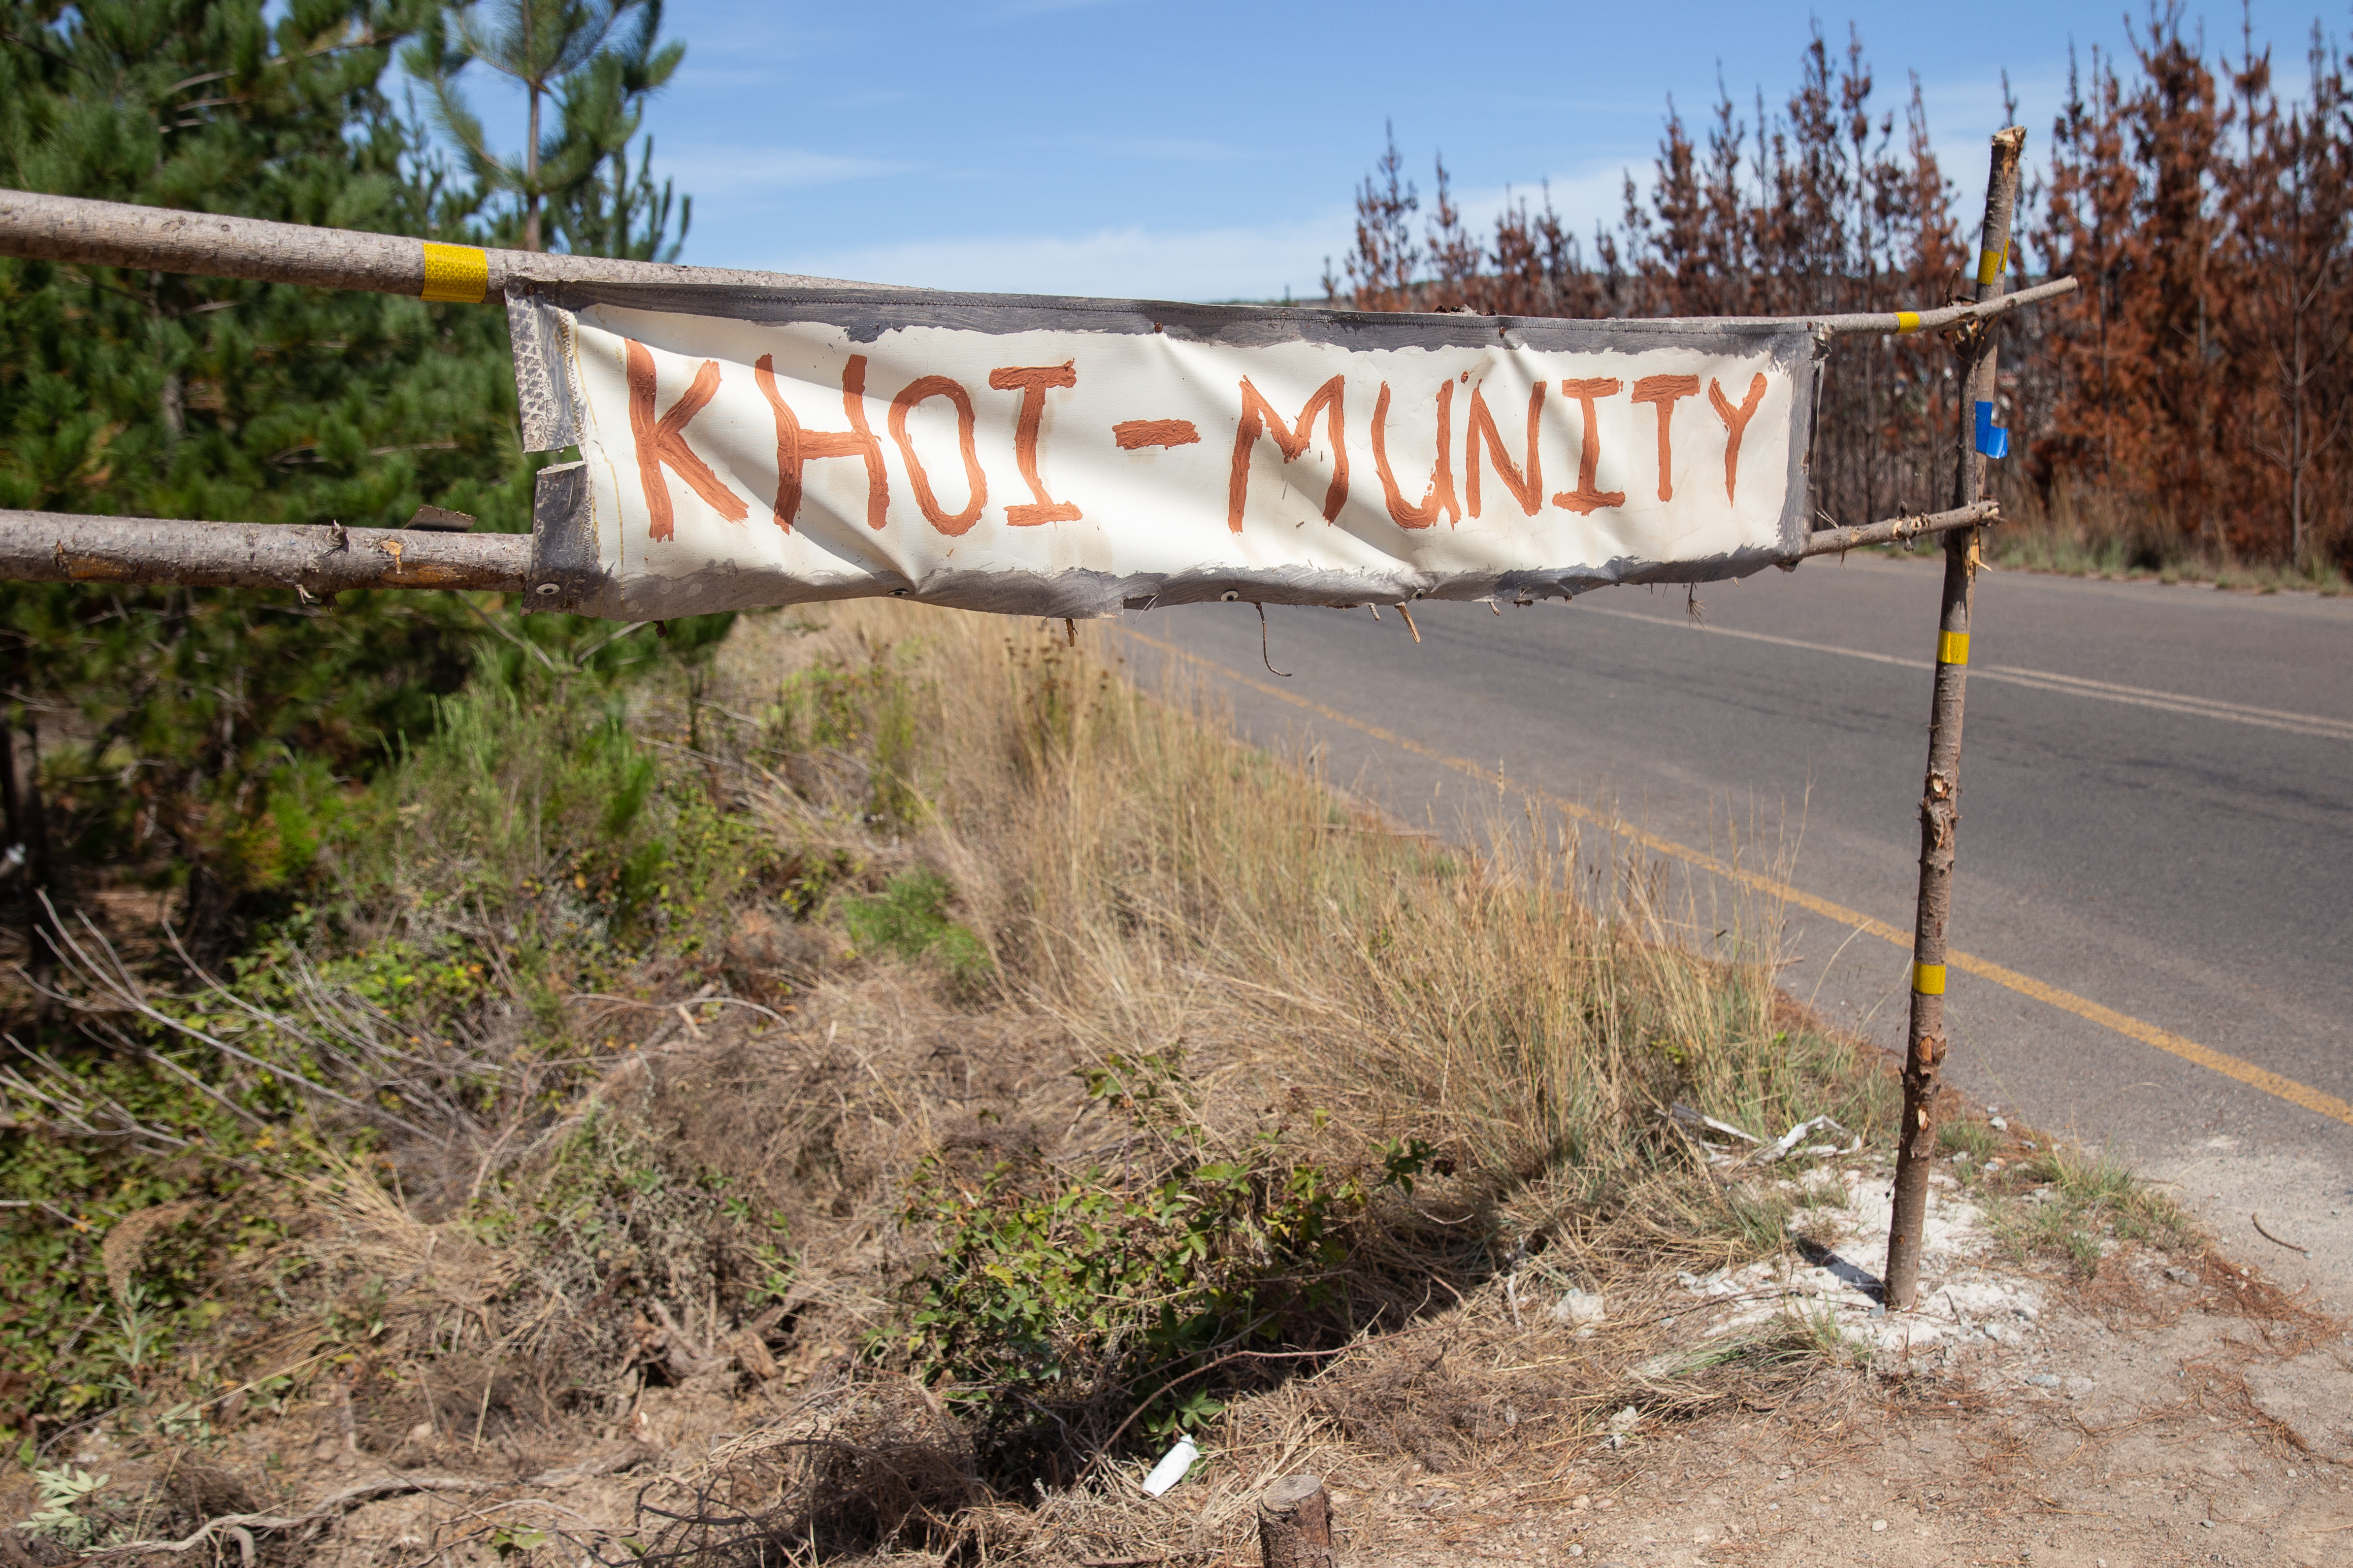 An image of the "Khoi-munity" banner at the entrance to Knoflokskraal.